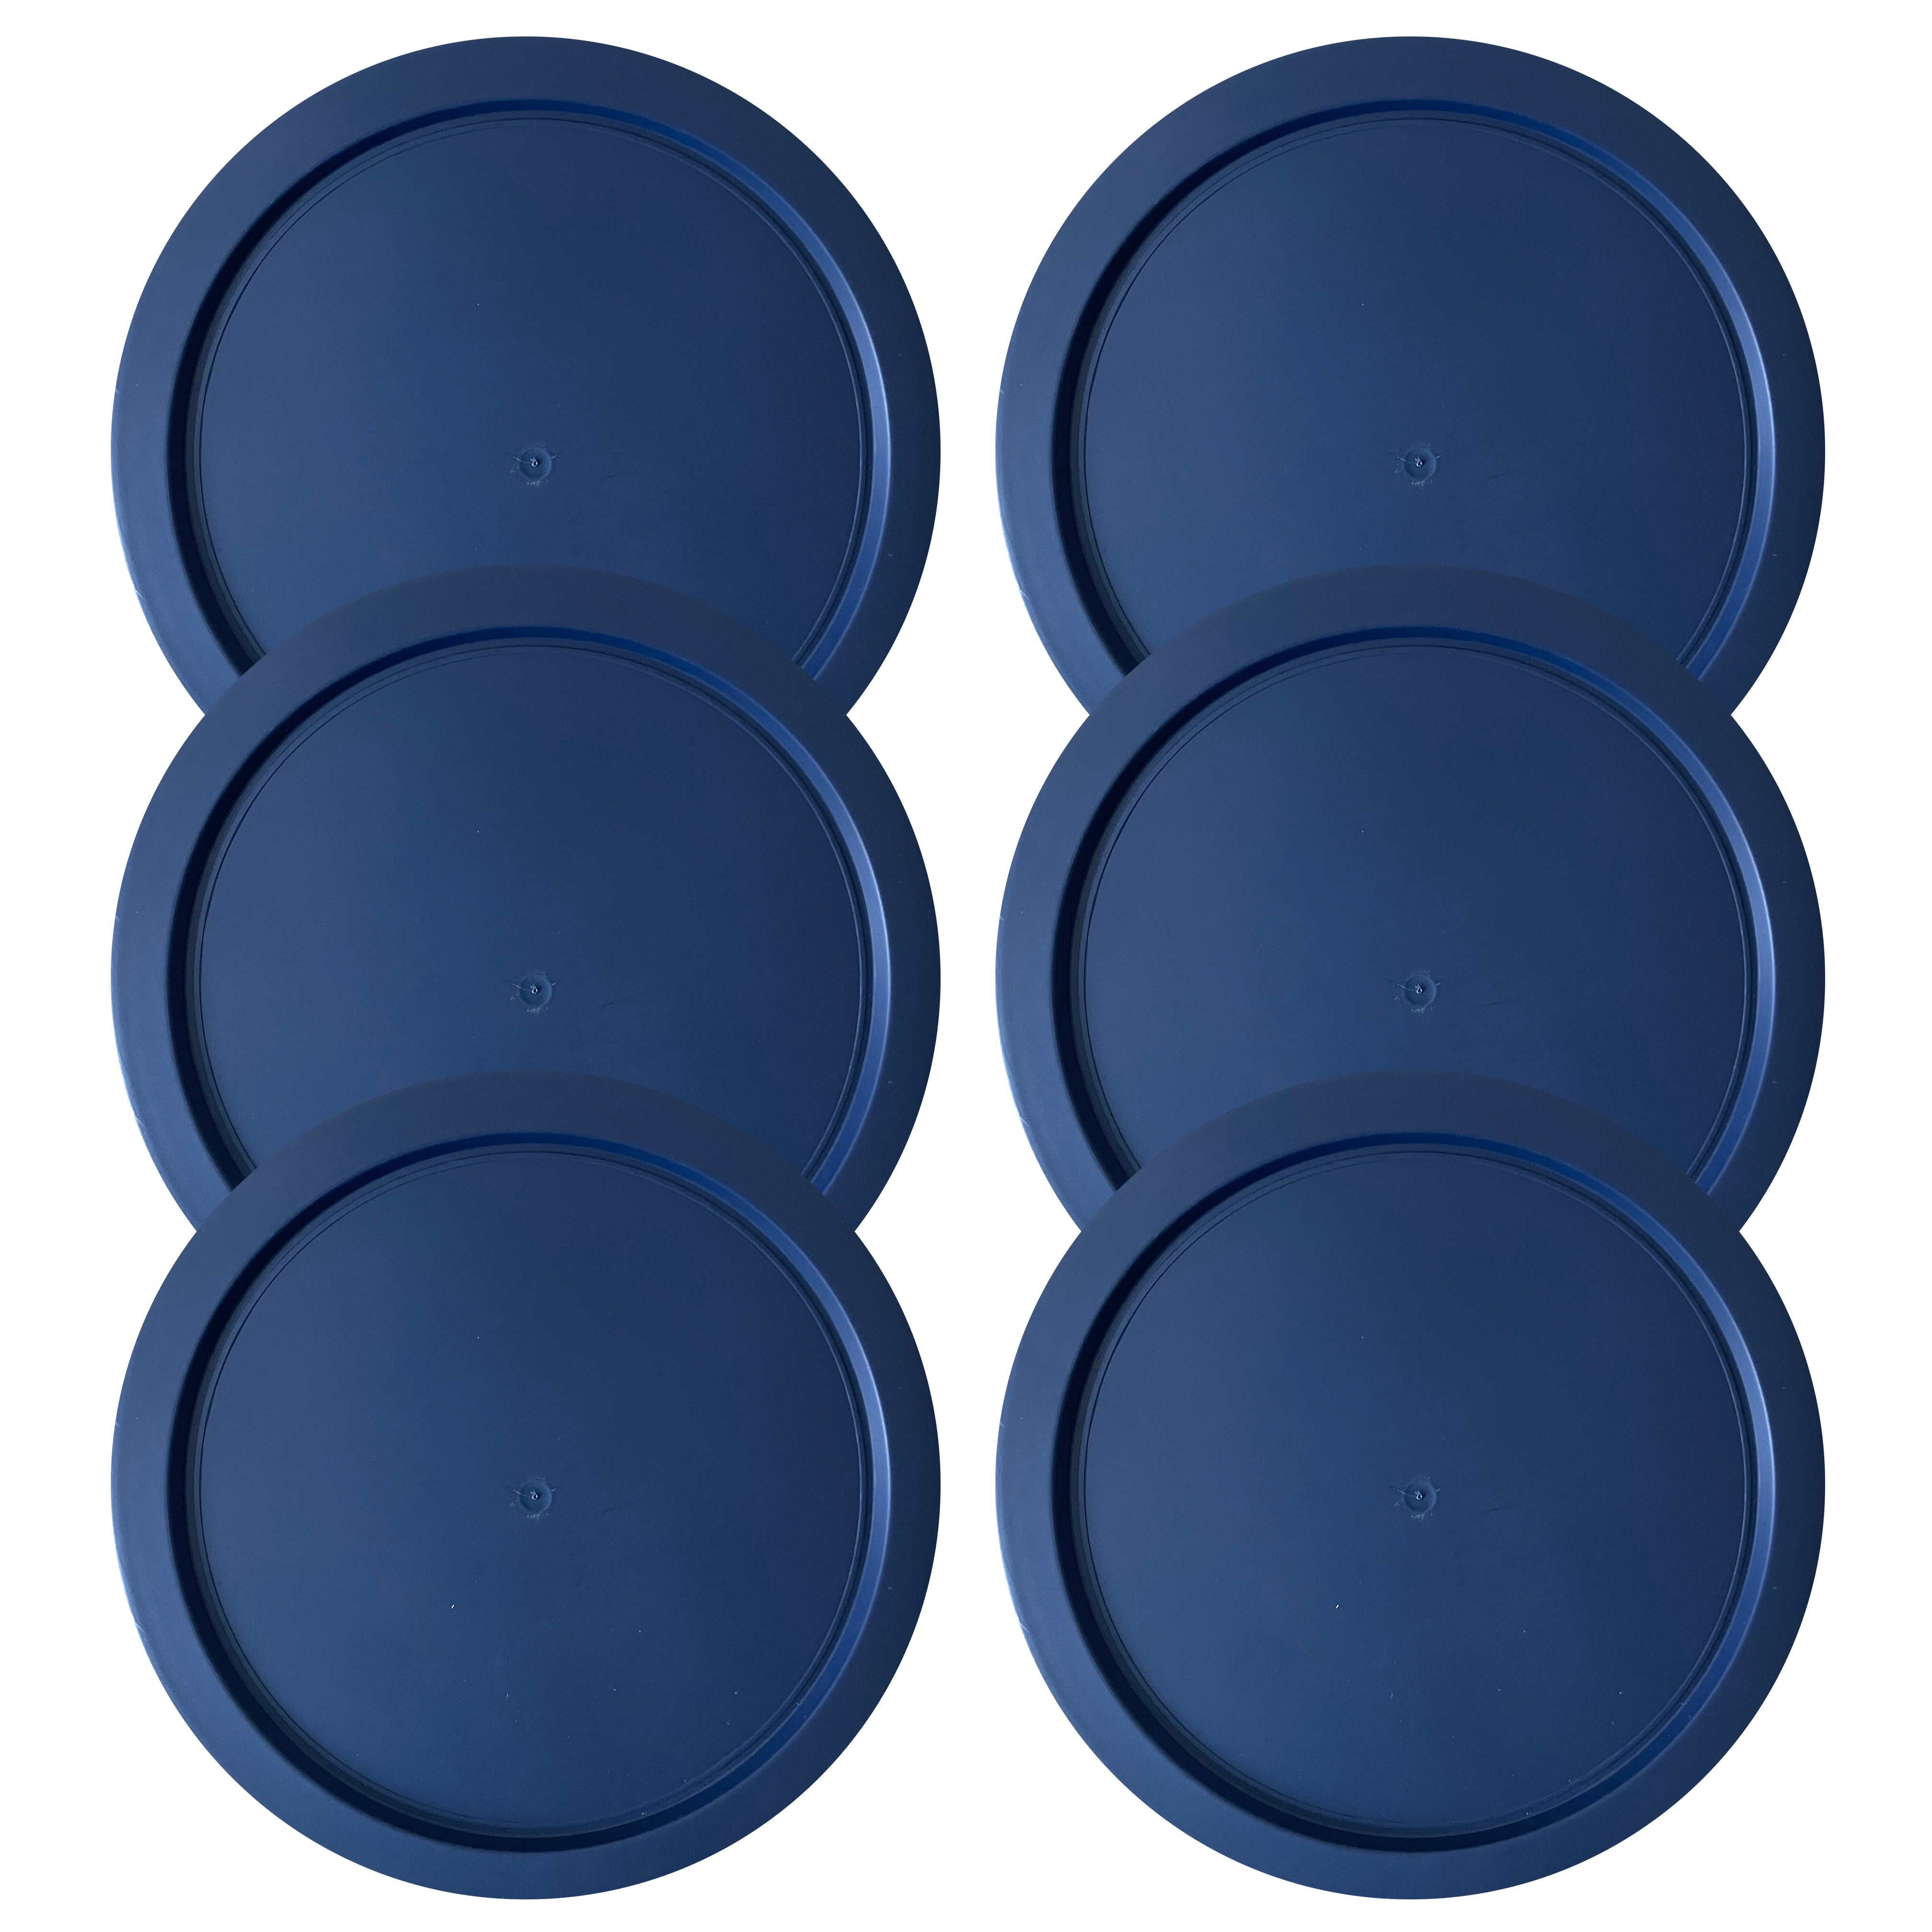 Replacement Lids for Pyrex 7402-PC 7 Cup, Silicone Round Storage